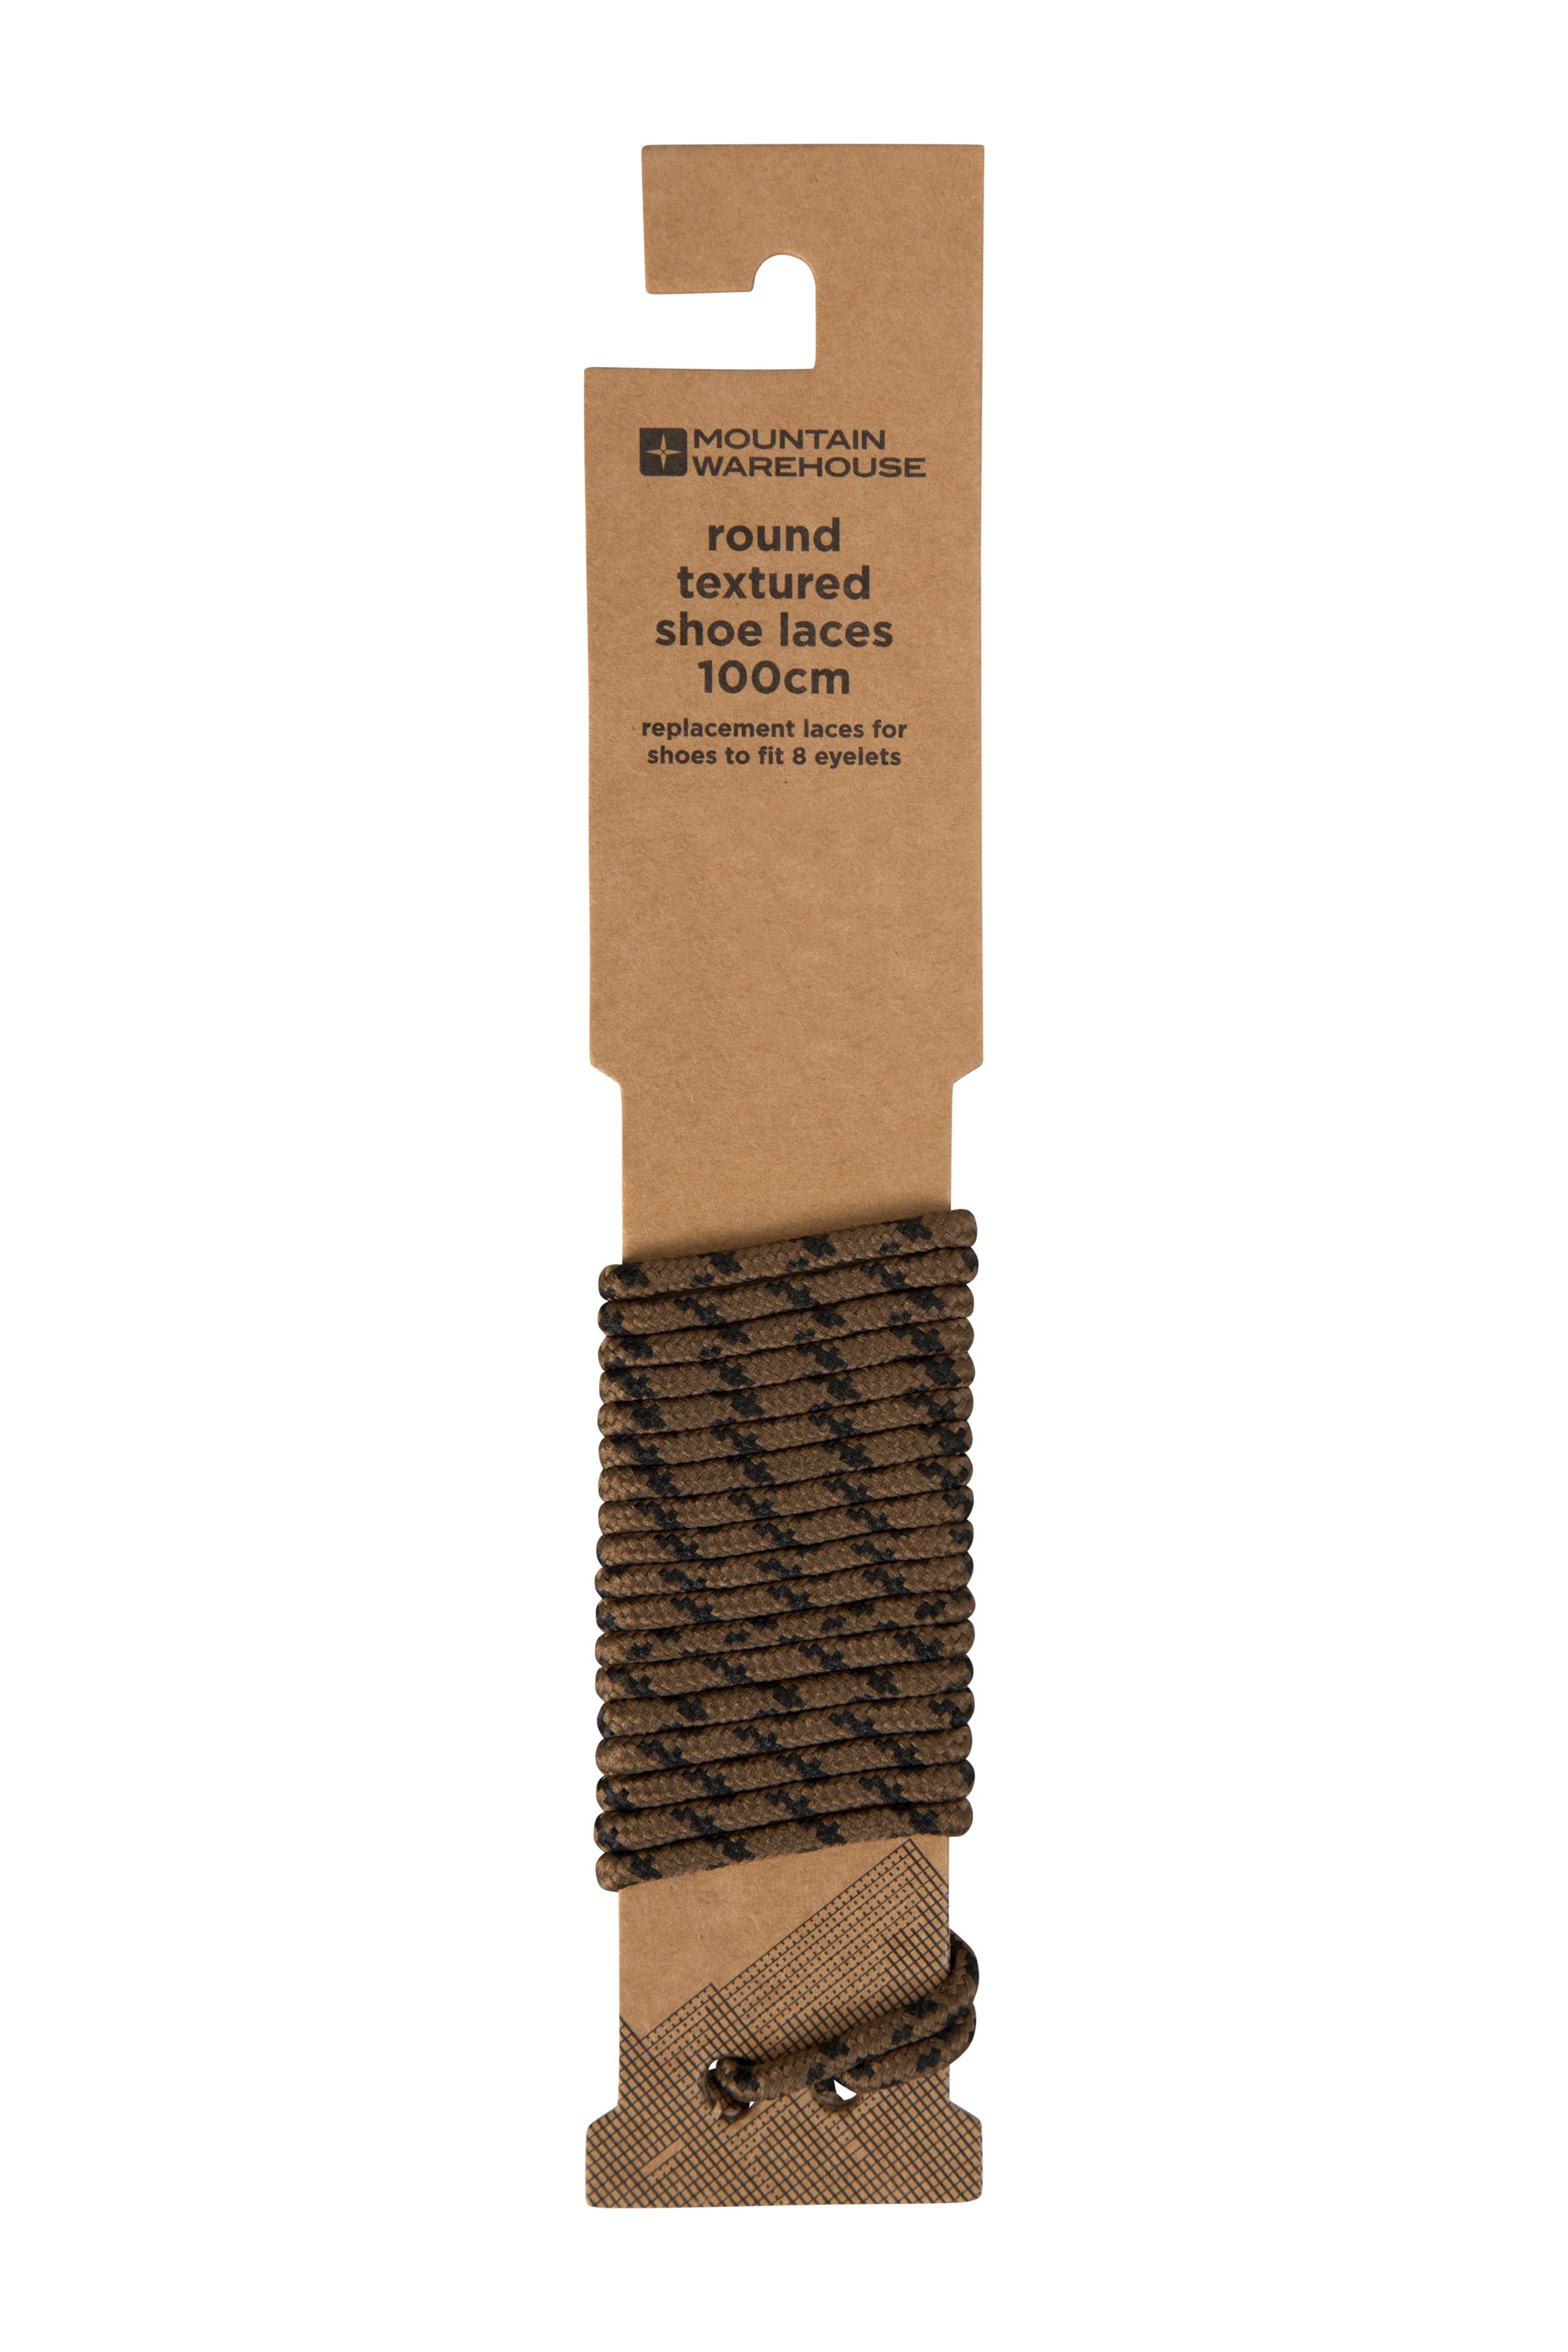 Mountain Warehouse Round Textured Shoe Laces 100cm Brown